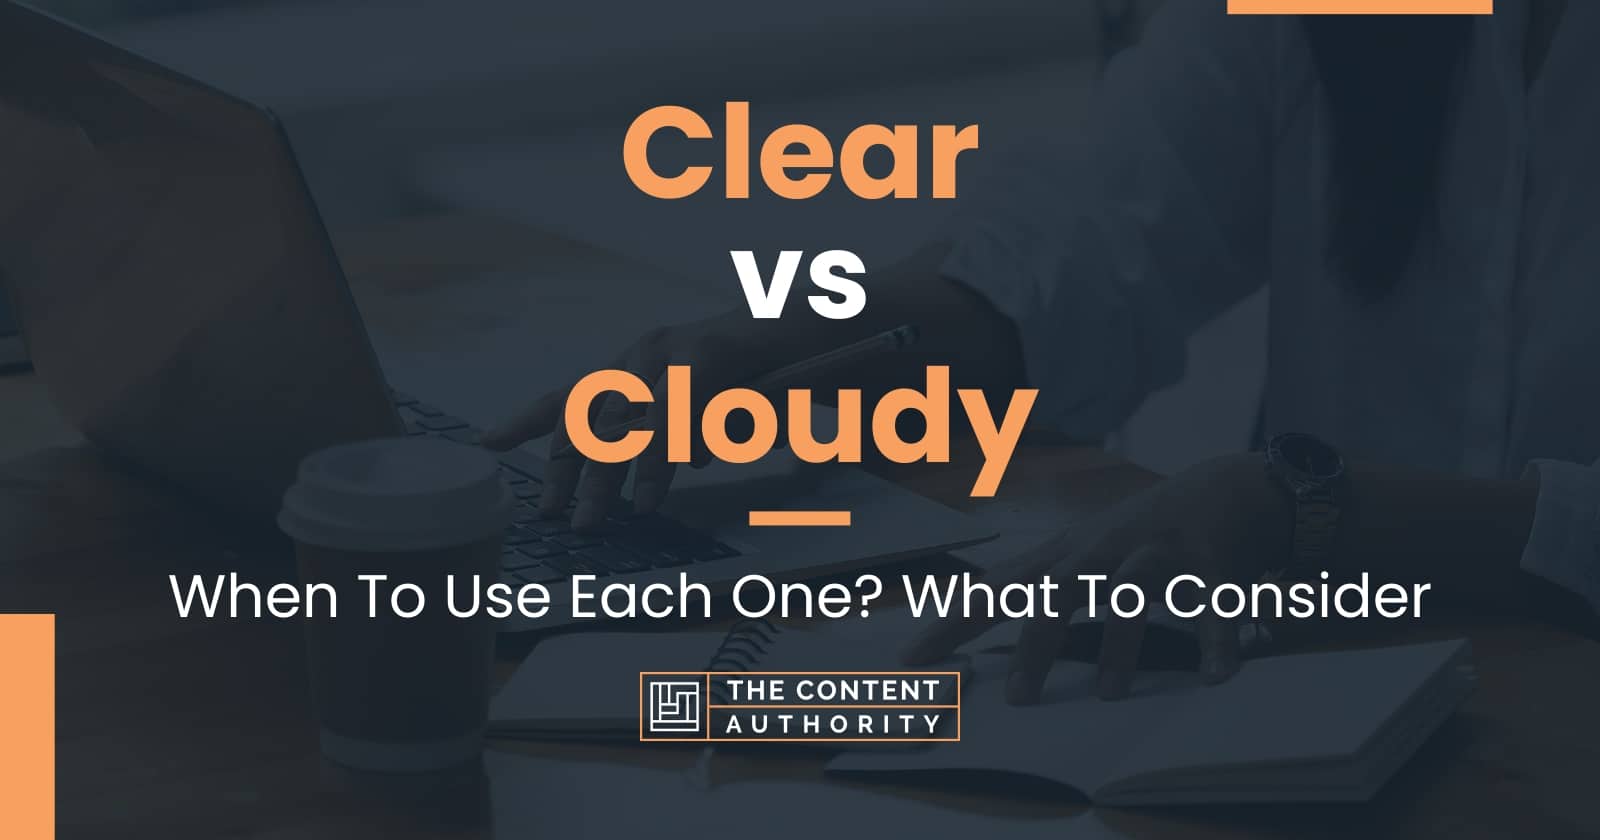 Clear vs Cloudy: When To Use Each One? What To Consider